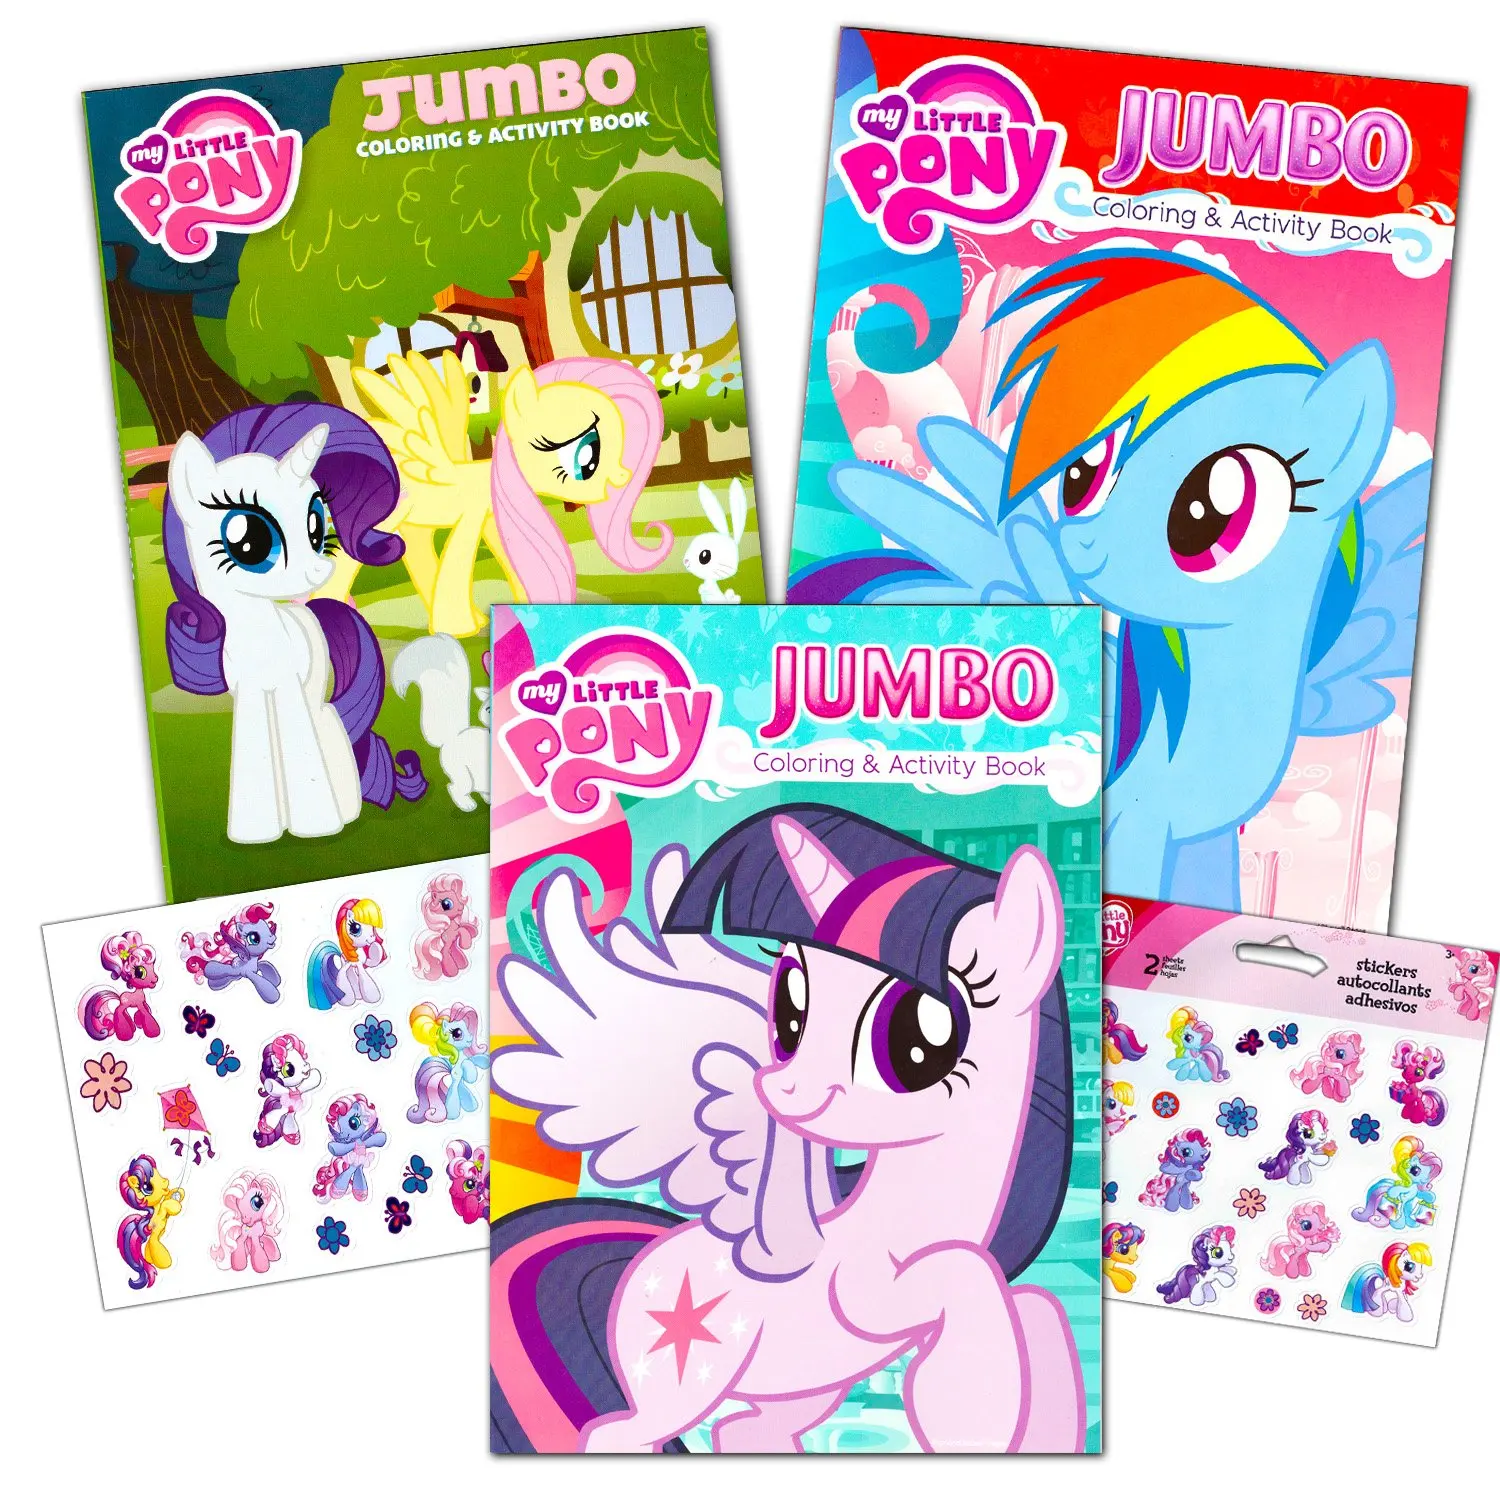 MLP Sticker Bendon Big My Little Pony Art /& Ring Set with Little Pony Memo Pads Coloring Pop Up Characters Too Crayons Puzzle /& Coloring Book Ring Set